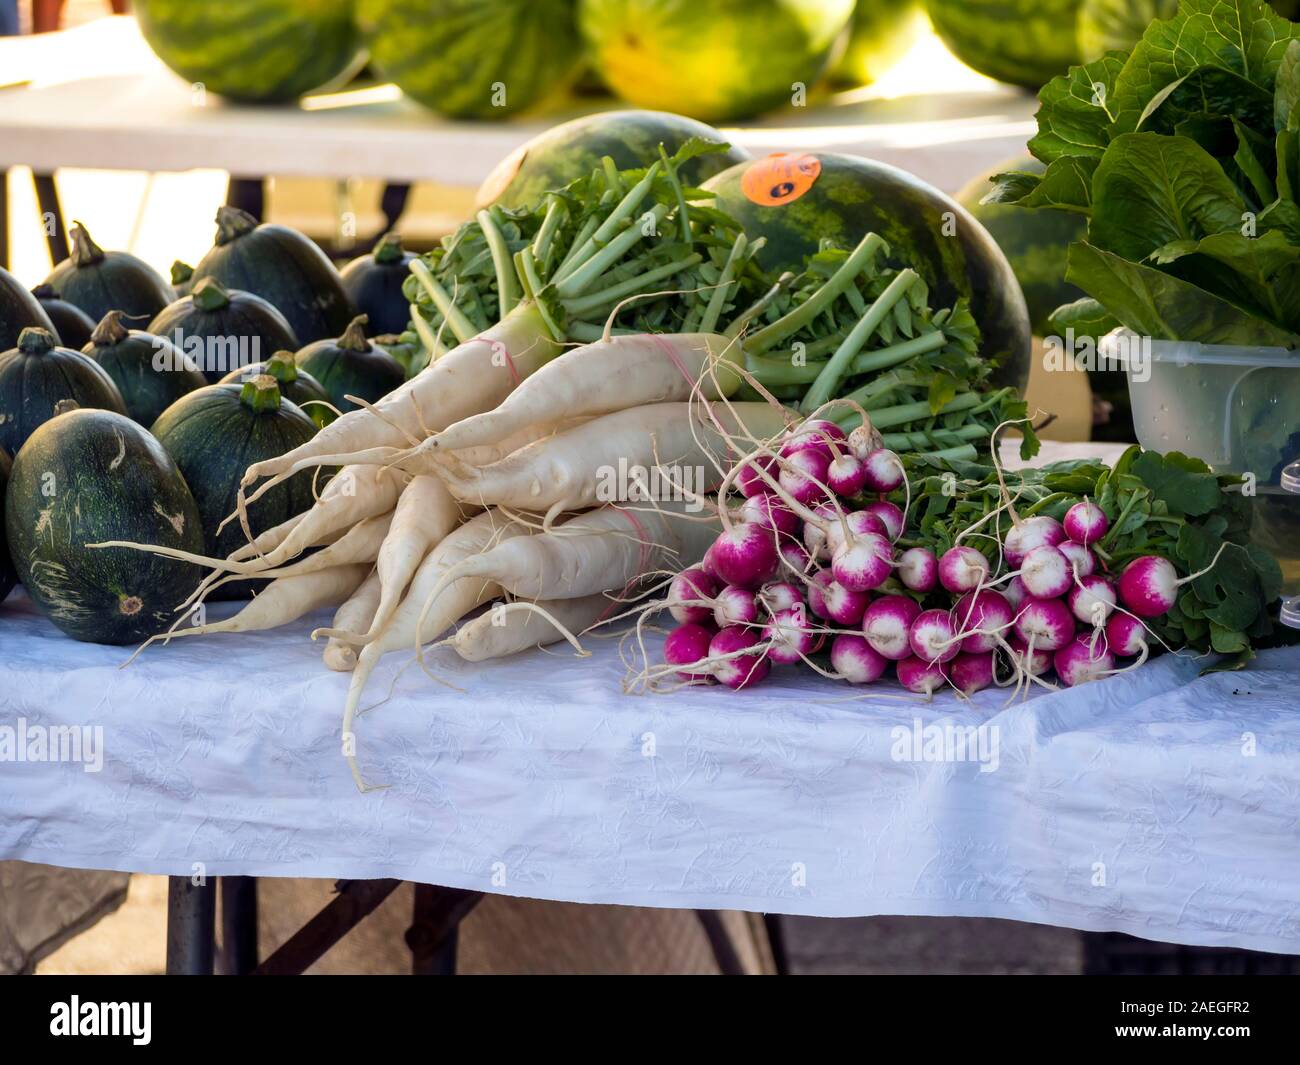 Radishes and melons displayed on a table at the Corpus Christi, Texas USA Southside Farmer's Market. Stock Photo